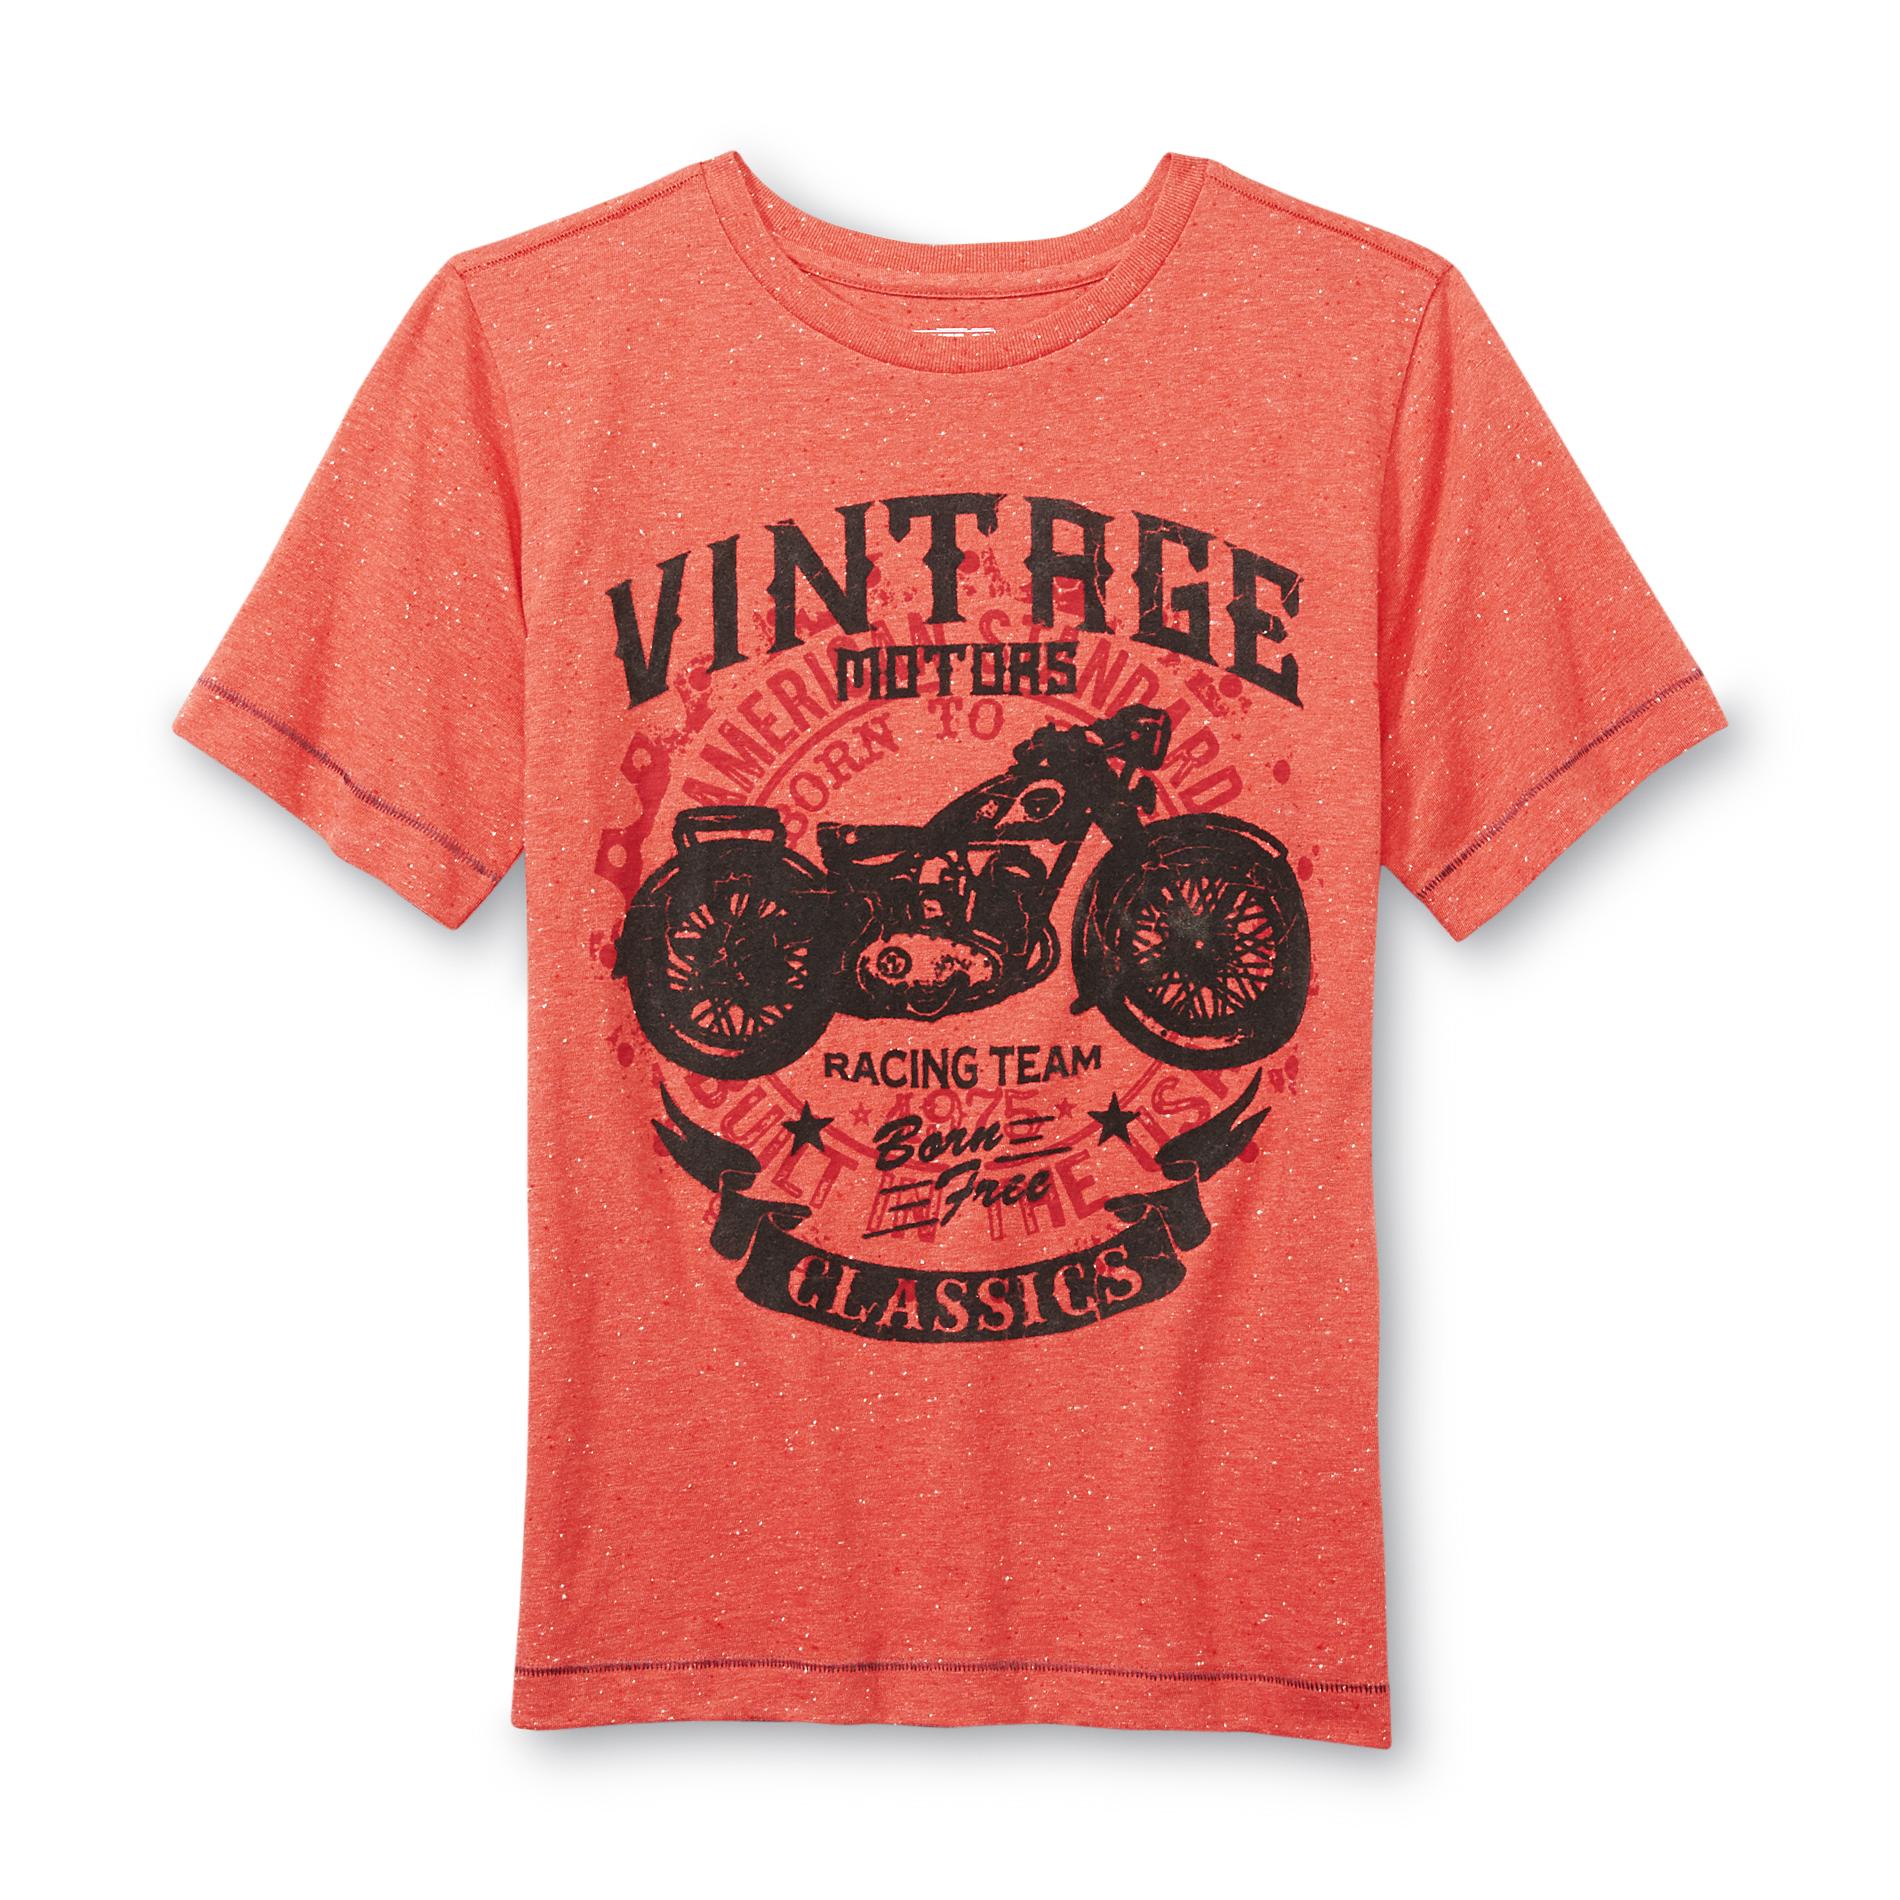 Route 66 Boy's Flocked Graphic T-Shirt - Motorcycle